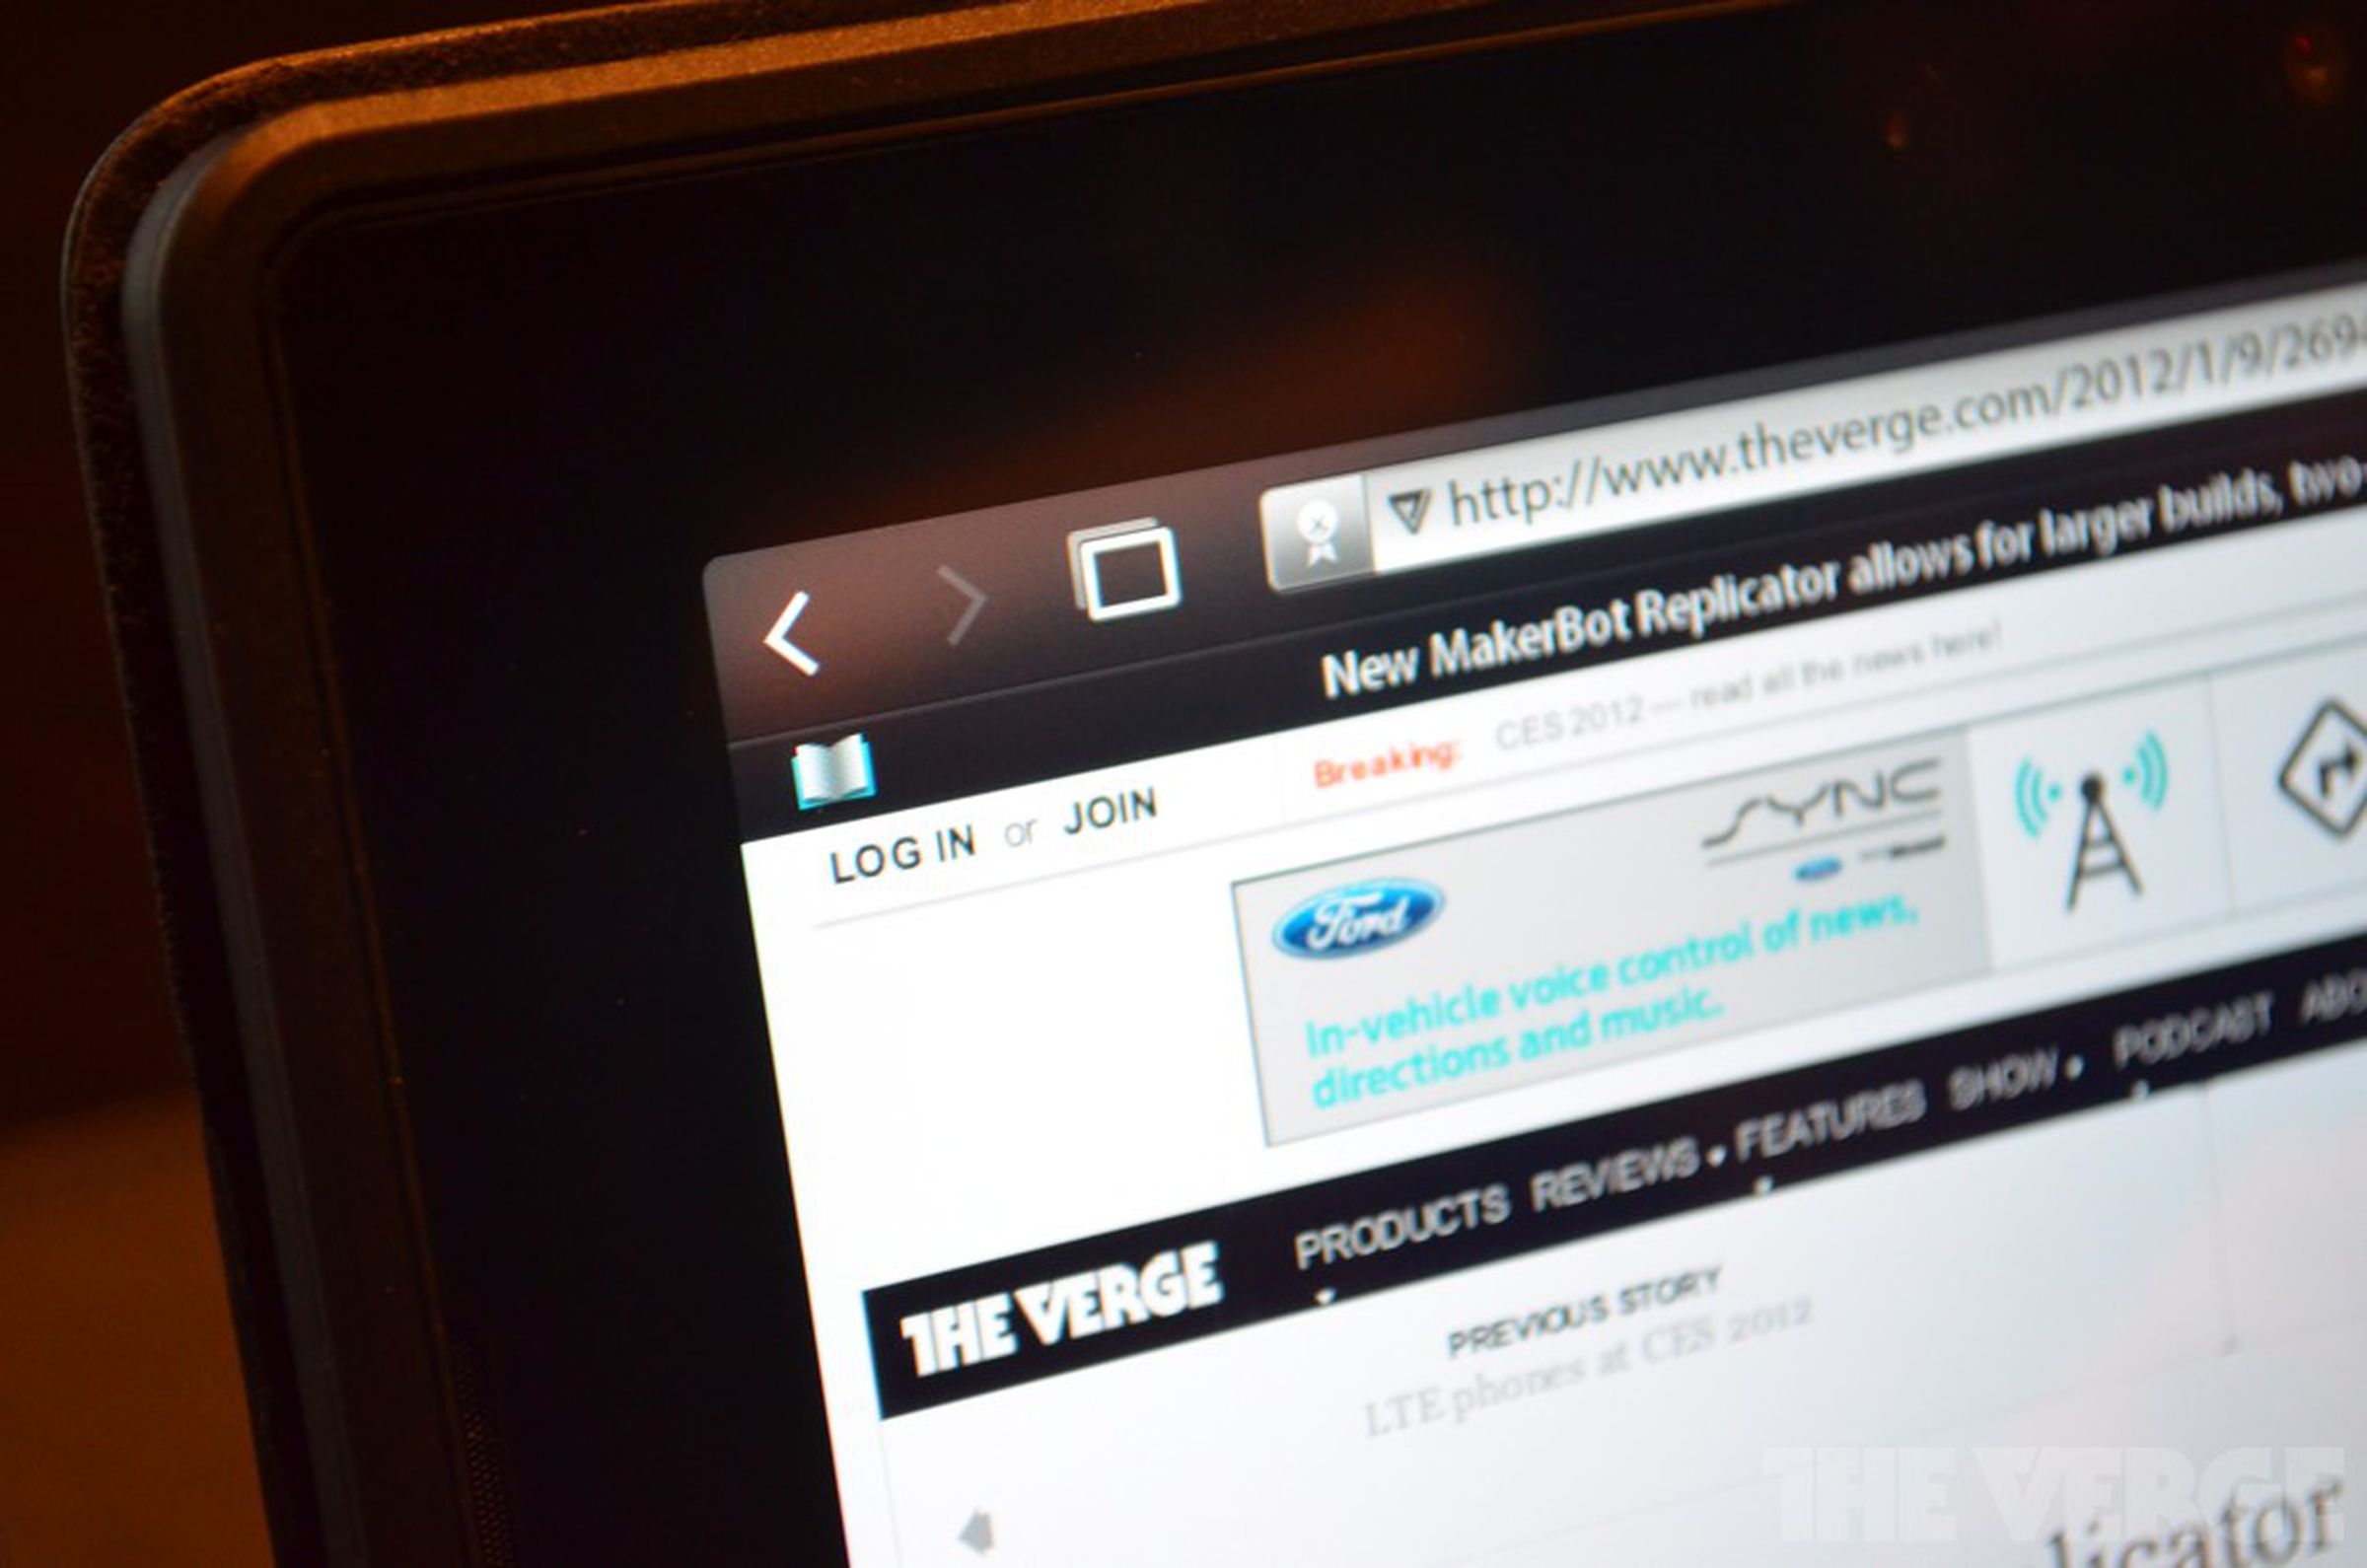 BlackBerry PlayBook OS 2.0 pictures